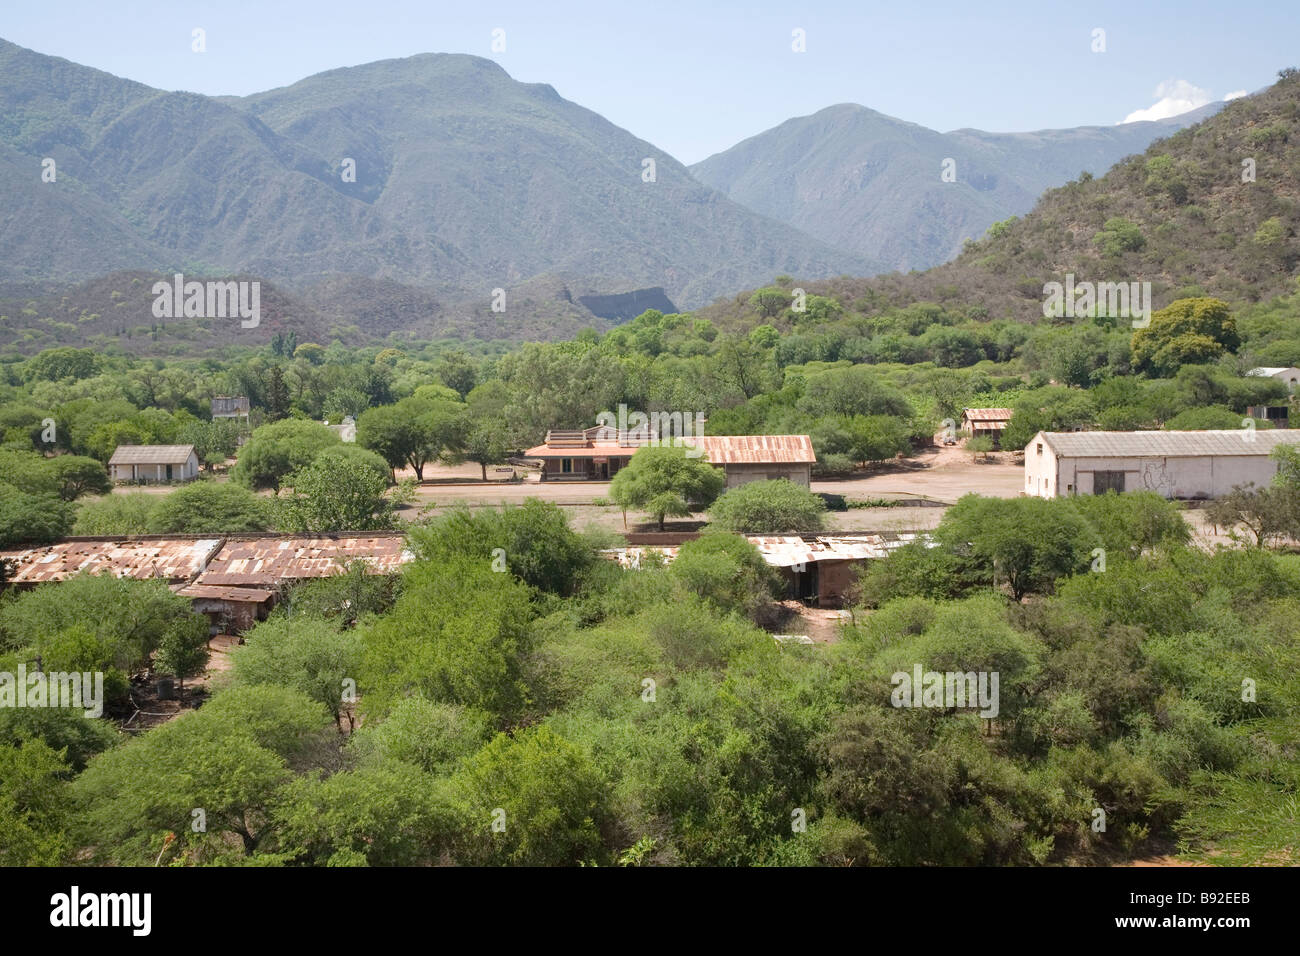 The ghost town of Alemania, Cafayate Gorge, Salta, Argentina Stock Photo